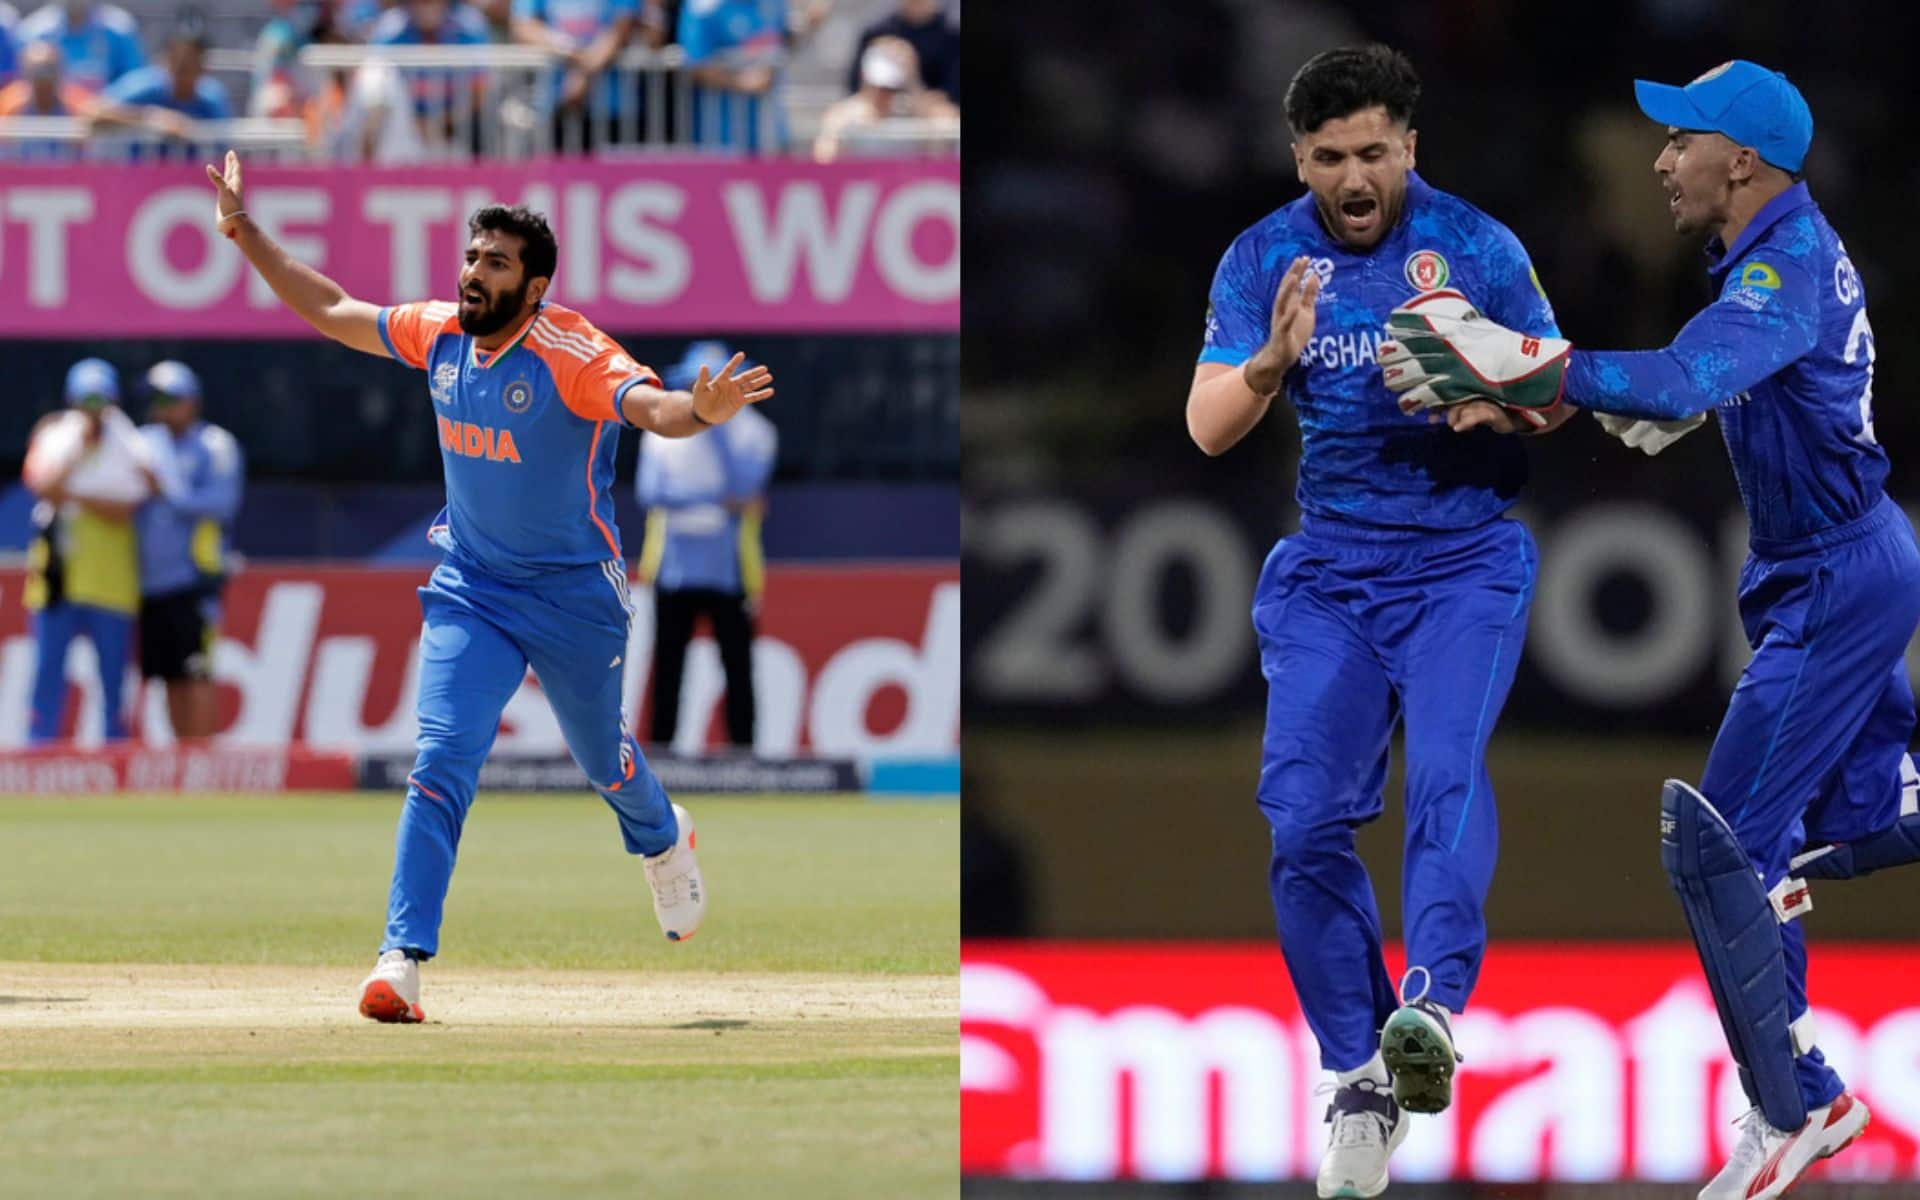 Jasprit Bumrah and Fazalhaq Farooqi has been in brilliant form for their team in the tournament [AP Photos]